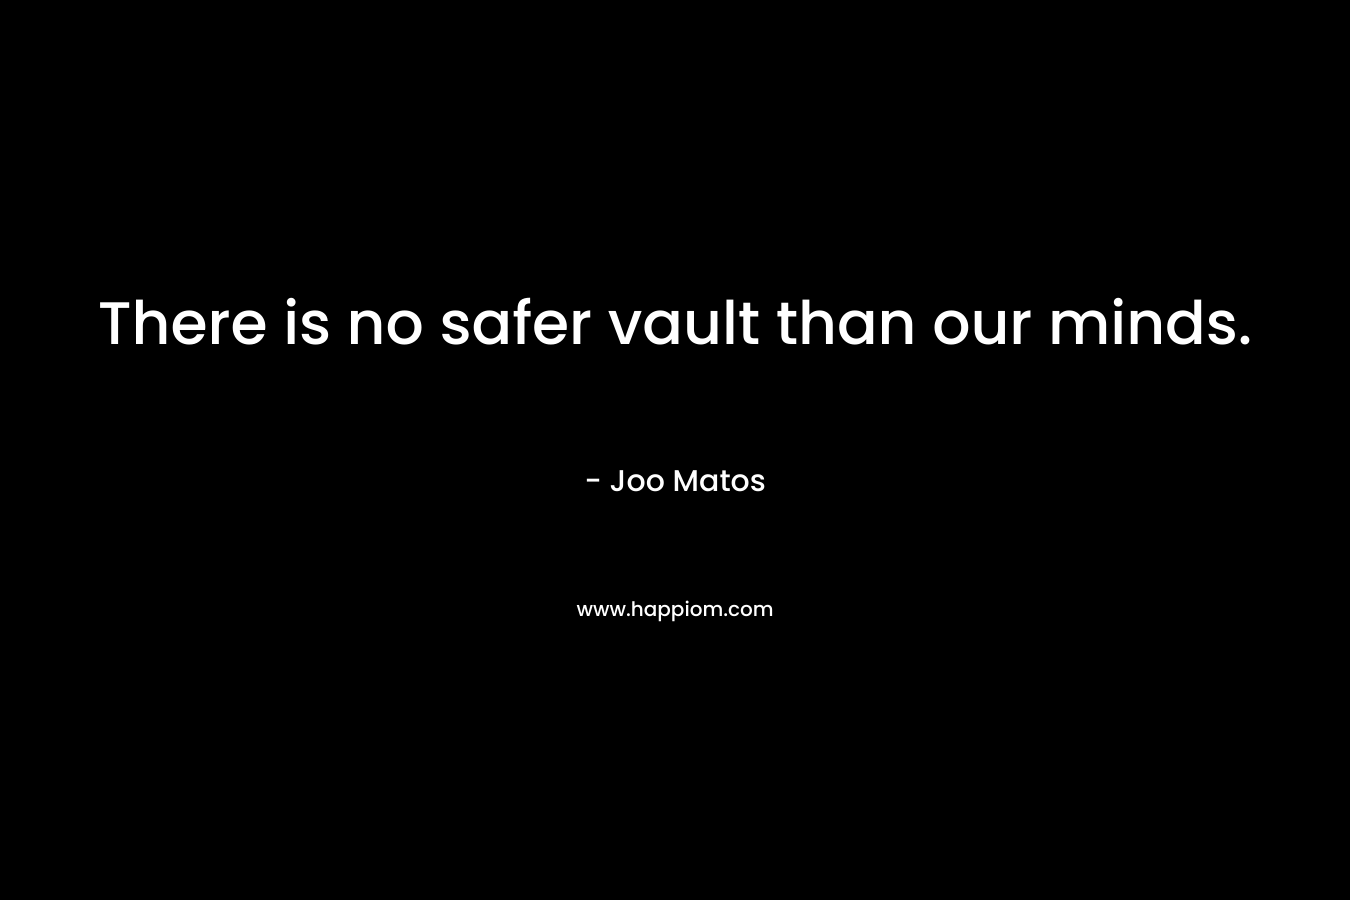 There is no safer vault than our minds. – Joo Matos